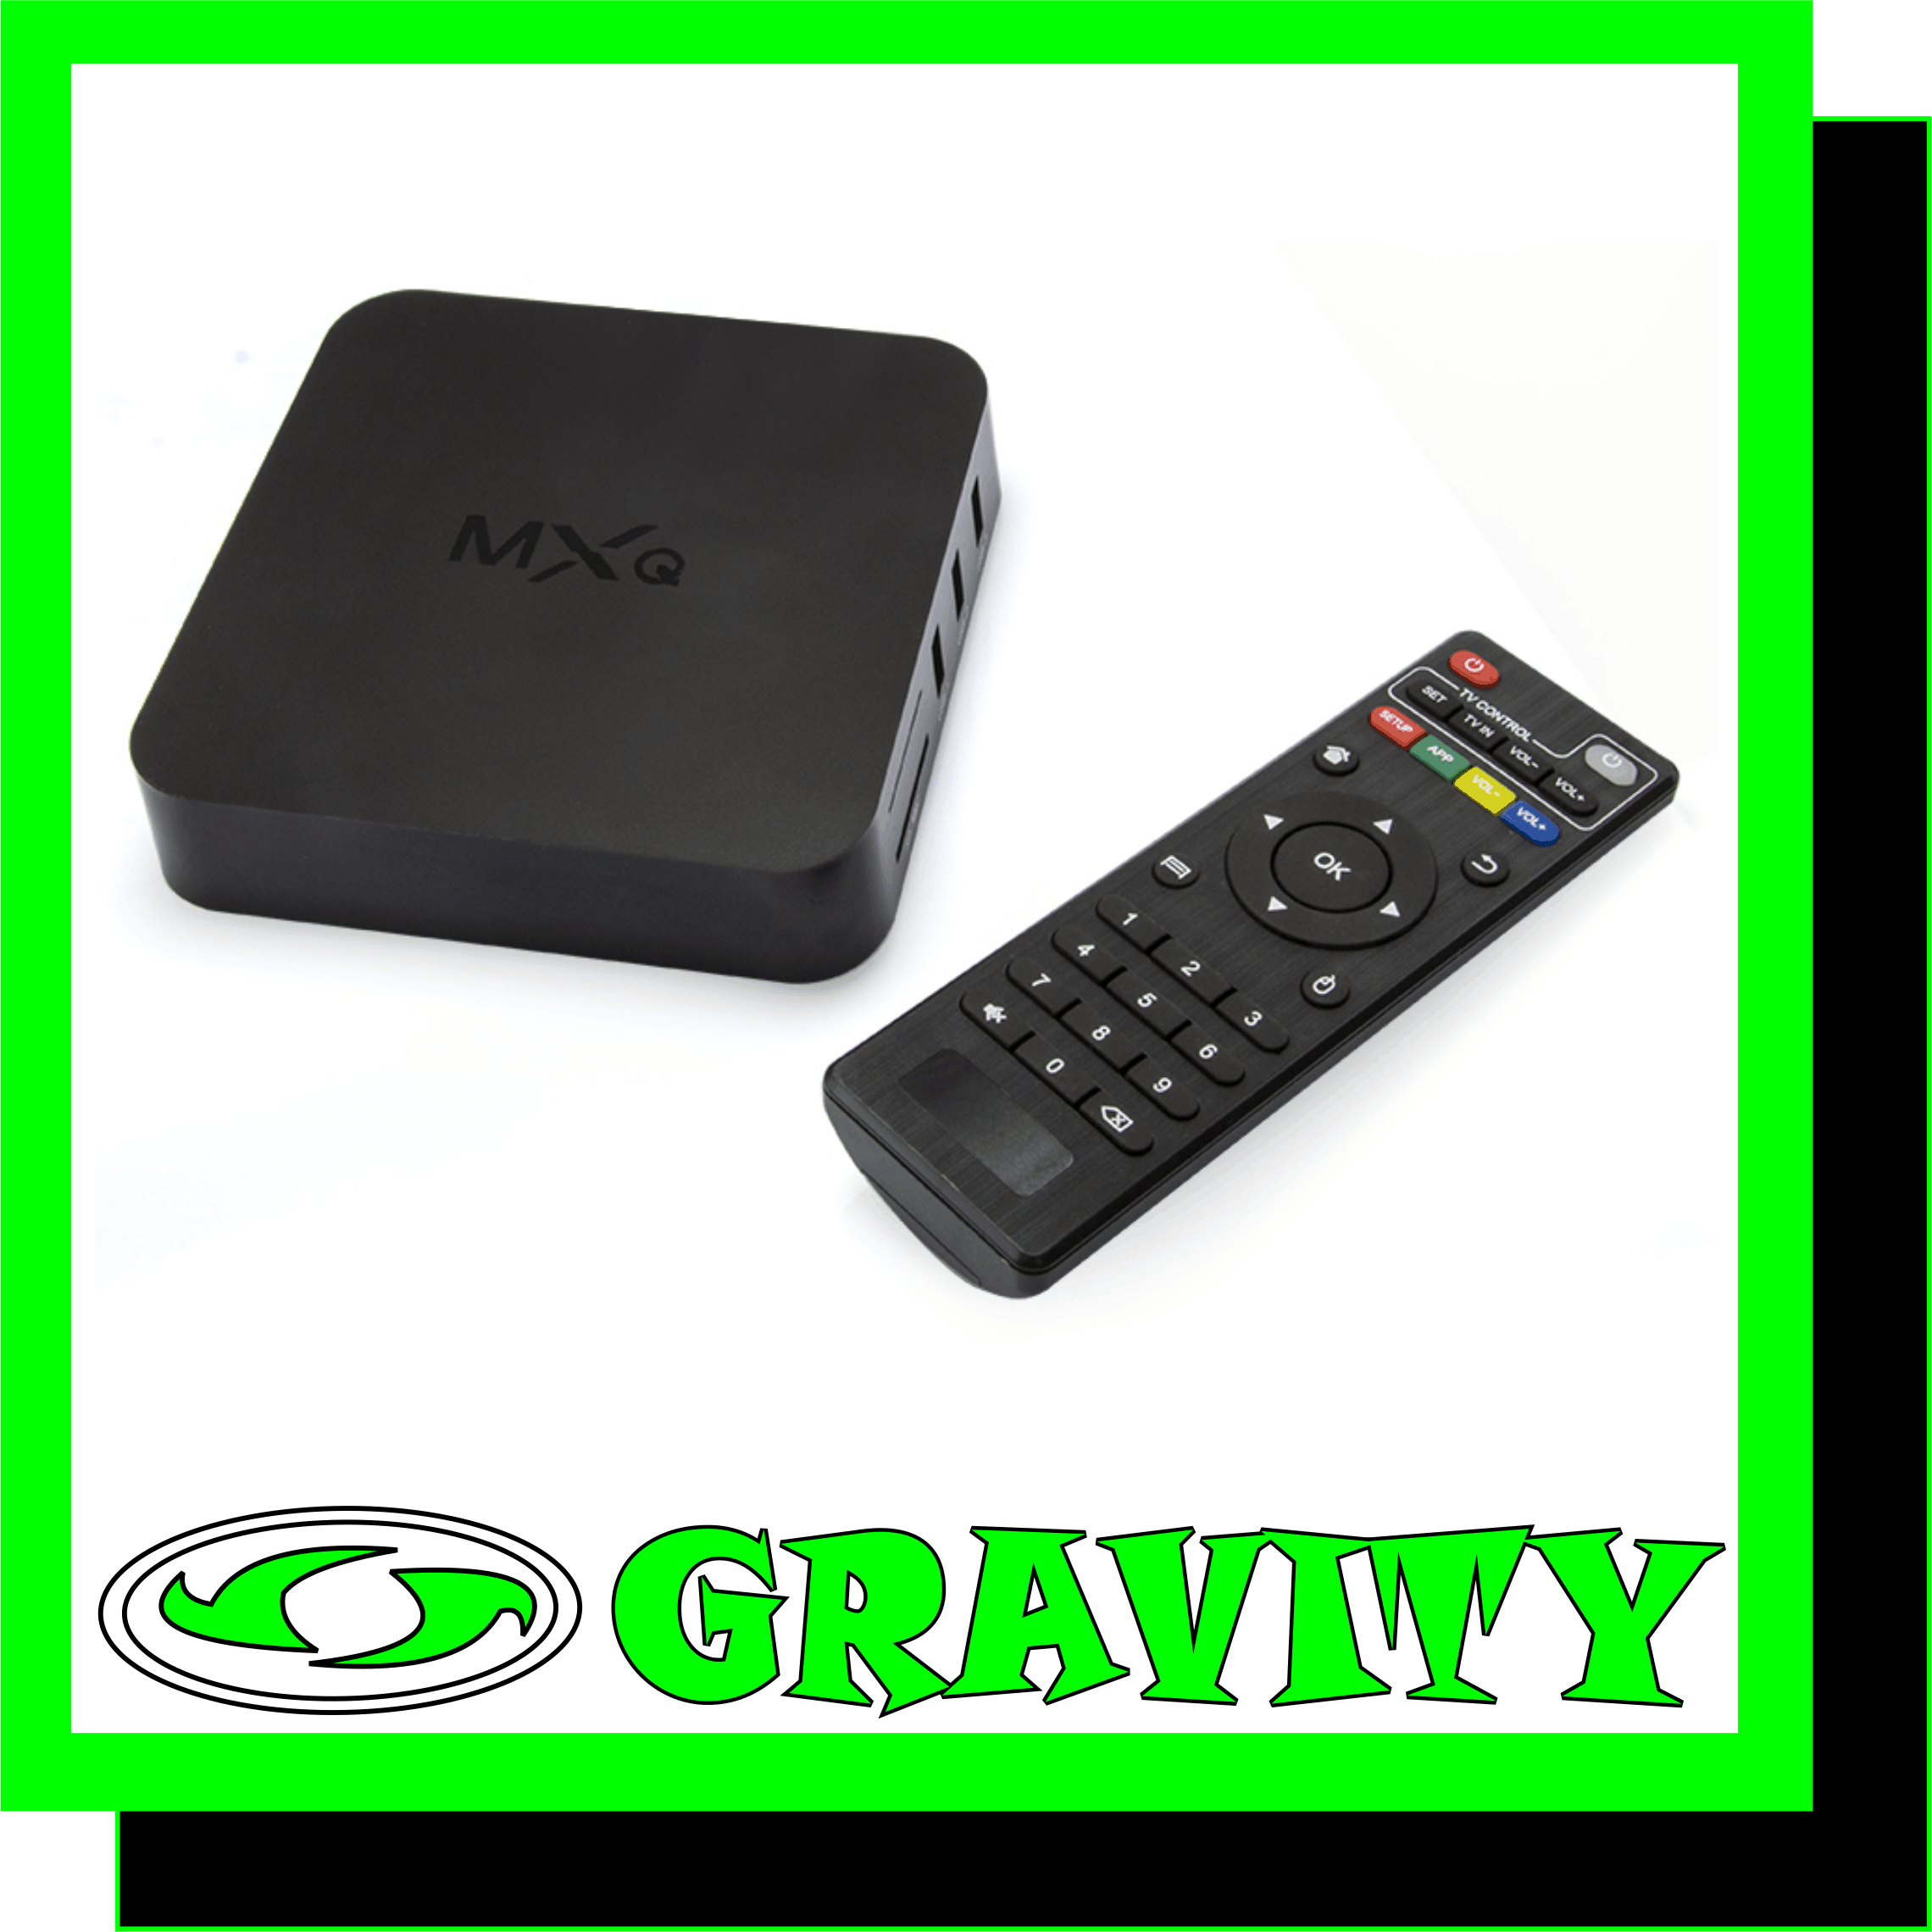 Watch online movies and play your favourite Android games on a big screen with this modern designed TV Box featuring a powerful Quad Core processor, 4K video and Android 5.1.  Software - OS: Android 5.1 - Wi-Fi: 802.11b/g/n, Wi-Fi 2.4GHz - Google TV, Netflix, Skype, KODI, Youtube, Twitter, Facebook, etc - Internet browsing, thousands of android applications, many kinds of games etc.   Hardware - Chipset: Rockchip RK3229 Quad-Core 32bit 4 x Cortex-A7 1.5GHz - GPU: Quad-Core 4 x Mali-400 - Memory: 1GB DDR3  - Flash Memory: 8GB ROM   Video - H.265 HEVC MP-10 at L5.1, up to 4K x 2K at 60fps - H.264 AVC HPat L5.1, up to 4K x 2K at 30fps - H.264 MVC, up to 1080P at 60fps  Multimedia - Audio format: MP3, WAV, etc - Picture format: JPEG, GIF, PNG, BMP, etc - Video format: MP4, MKV, AVI, etc  Ports - HDMI: HDMI 2.0a x 1 port (HDCP 2.2) - USB: USB 2.0 x 4 port - AV: CVBS output x 1 port - Ethernet: 10/100M x 1 port - TF Card: 1 port - Power: DC 5V / 2A x 1 port